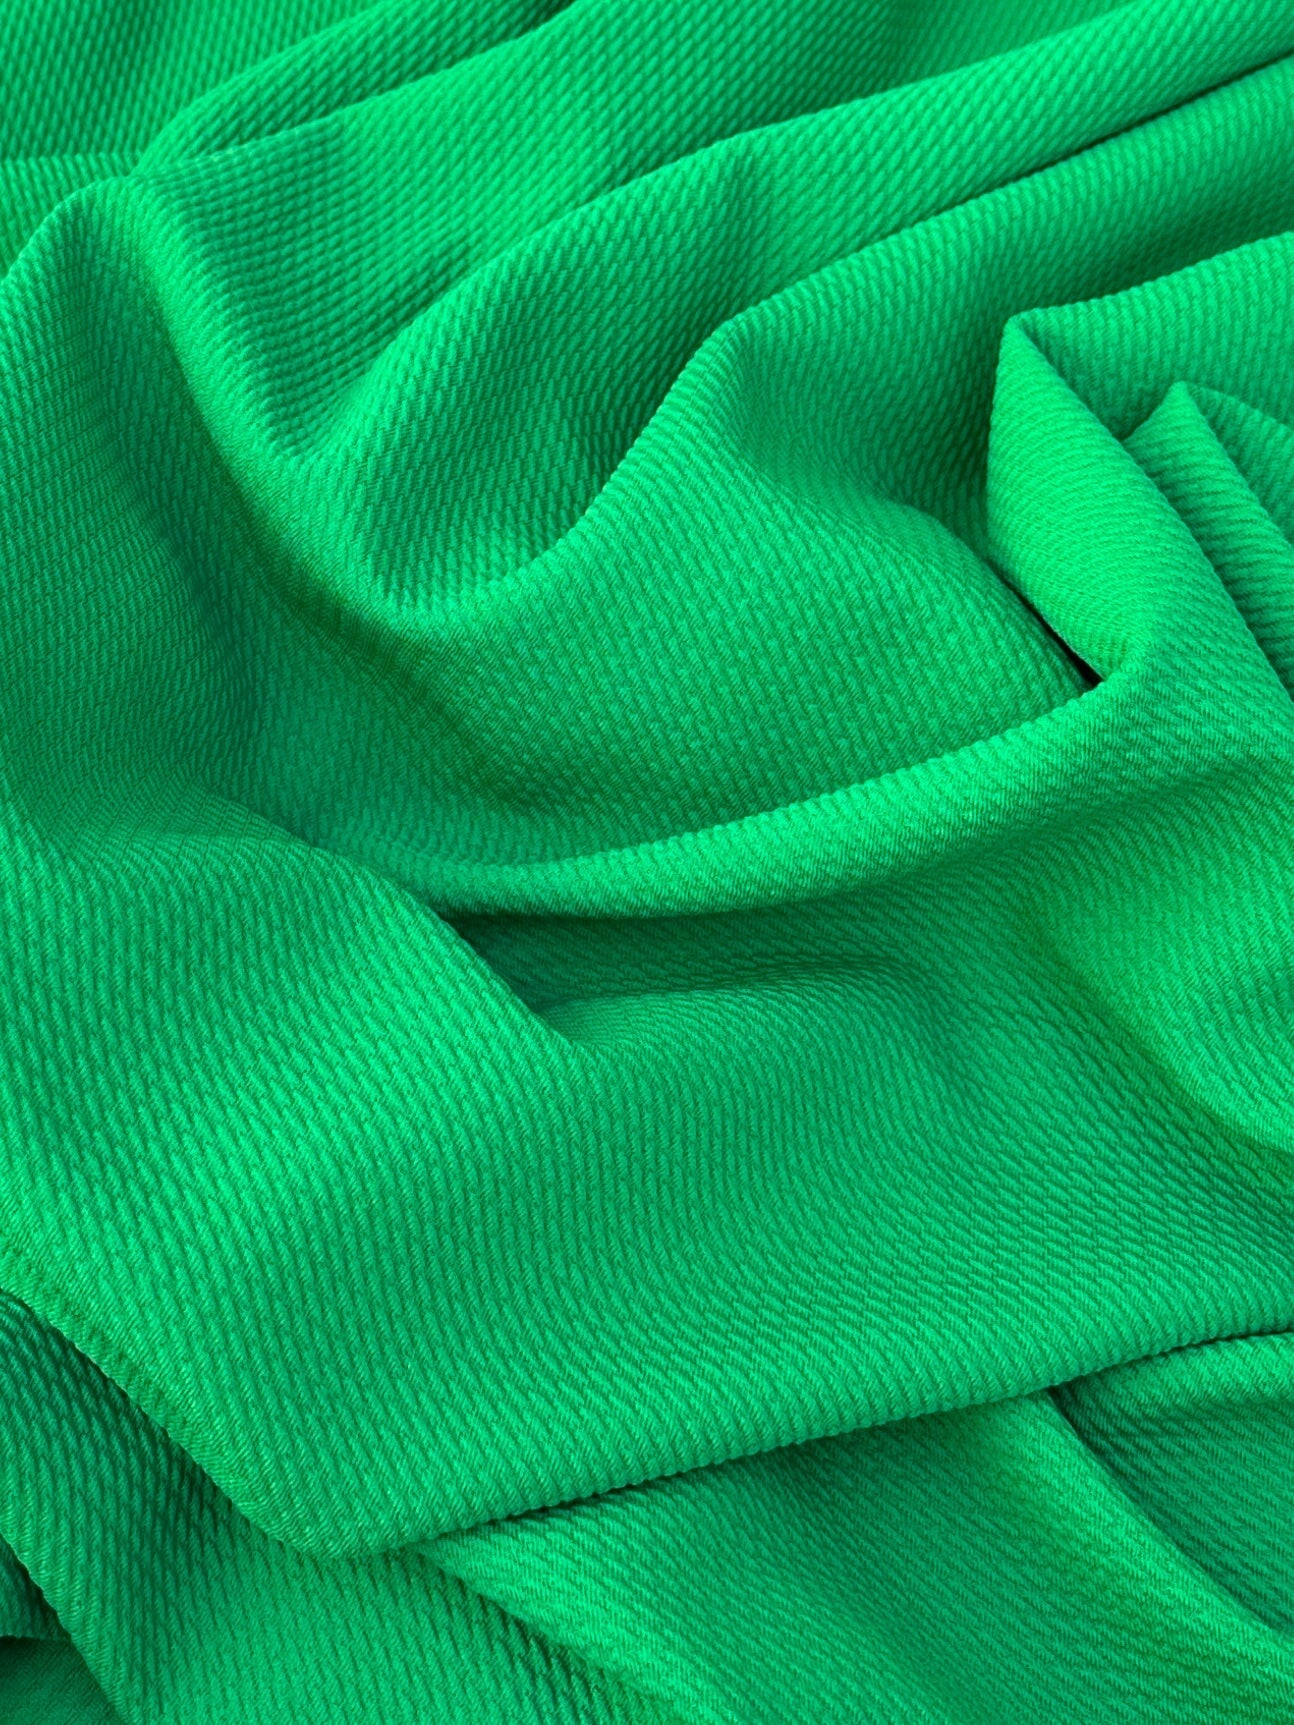 Kelly Green Liverpool Knit, green Liverpool Knit, light green Liverpool Knit, dark green Liverpool Knit, Liverpool Knit for woman, Liverpool Knit for party wear, Liverpool Knit for gown, Liverpool Knit for bride, Liverpool Knit on discount, Liverpool Knit on sale, premium Liverpool Knit 